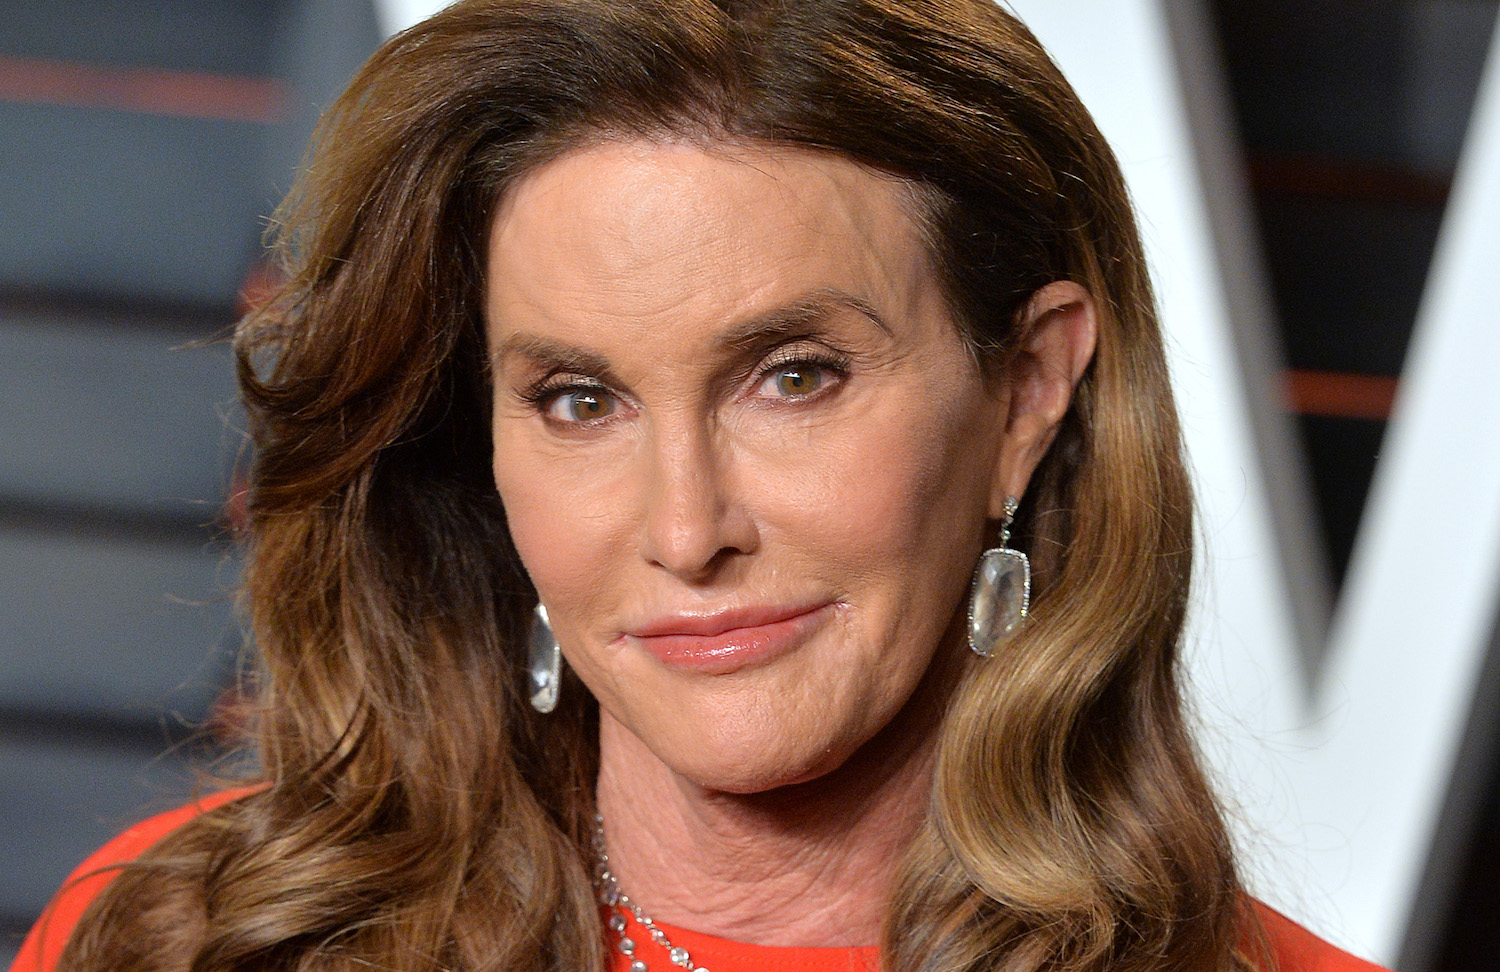 Caitlyn Jenner Just Revealed Her Skin Cancer Diagnosis with a Terrifying Photo